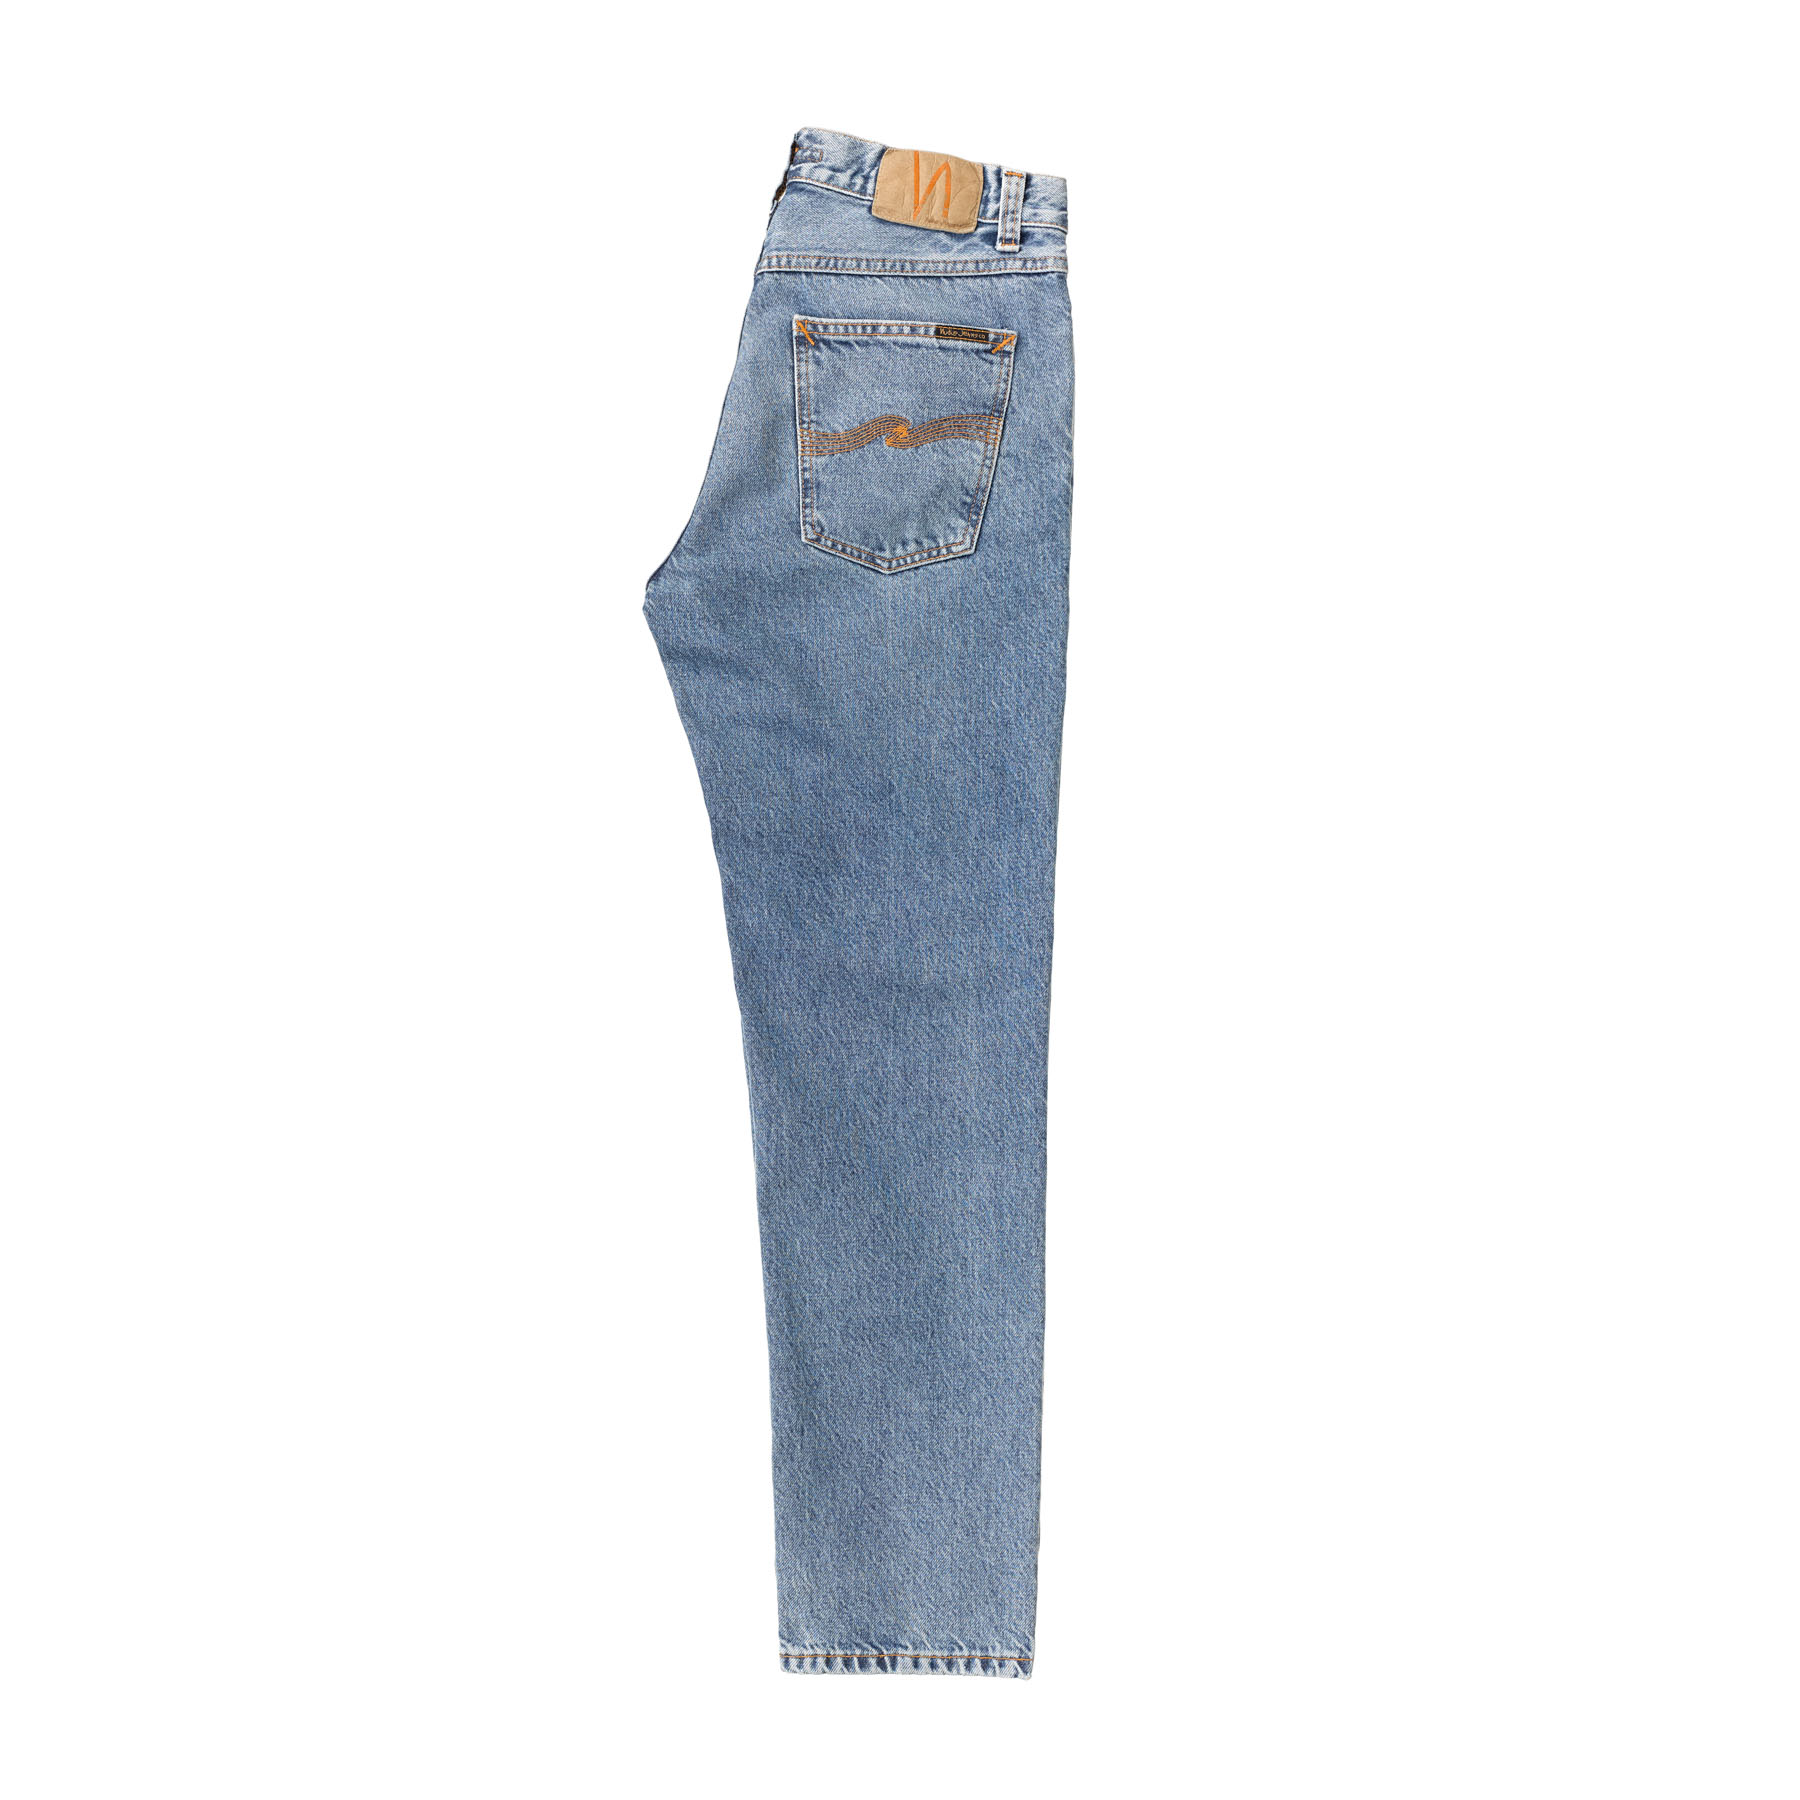 NUDIE JEANS Jeans Gritty Jackson blue traces 32/30